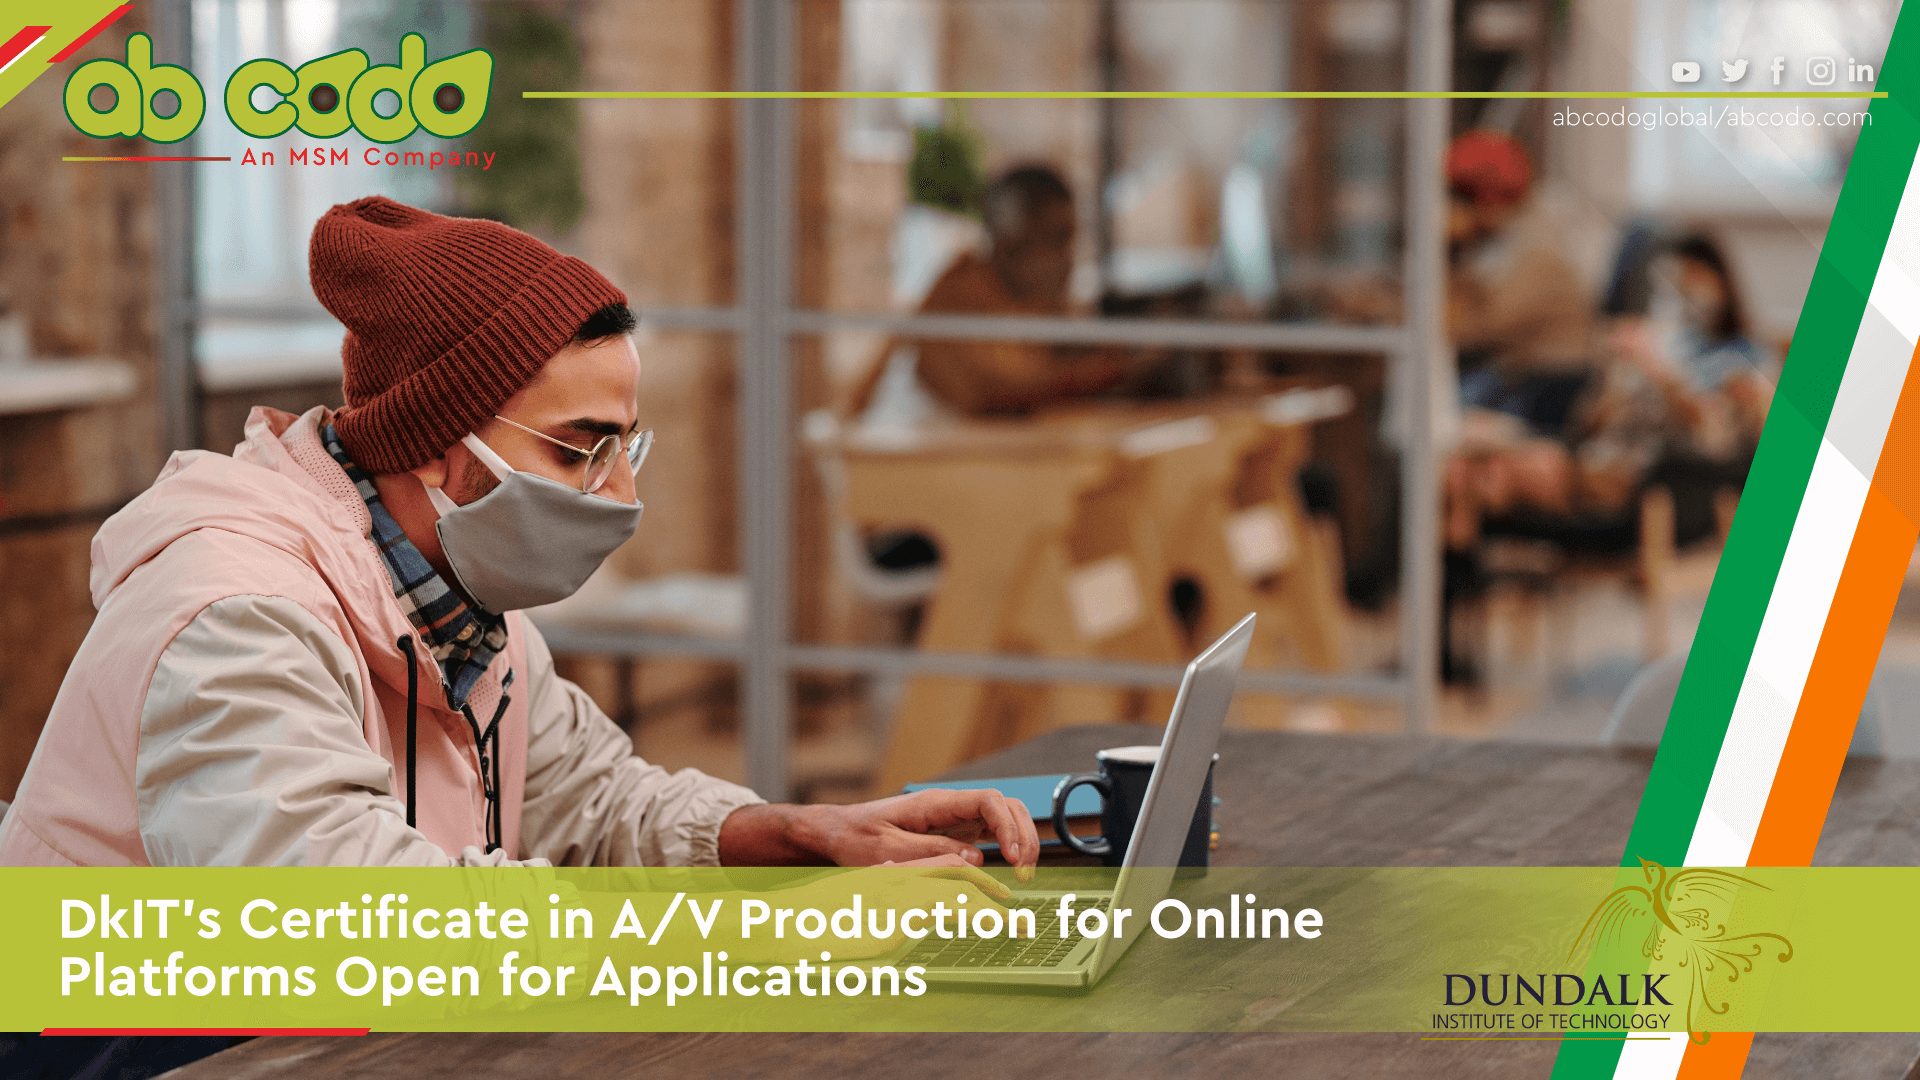 DkIT opened applications for its new Certificate in Audio-Visual Production for Online Platforms. Learn the details of the program here.